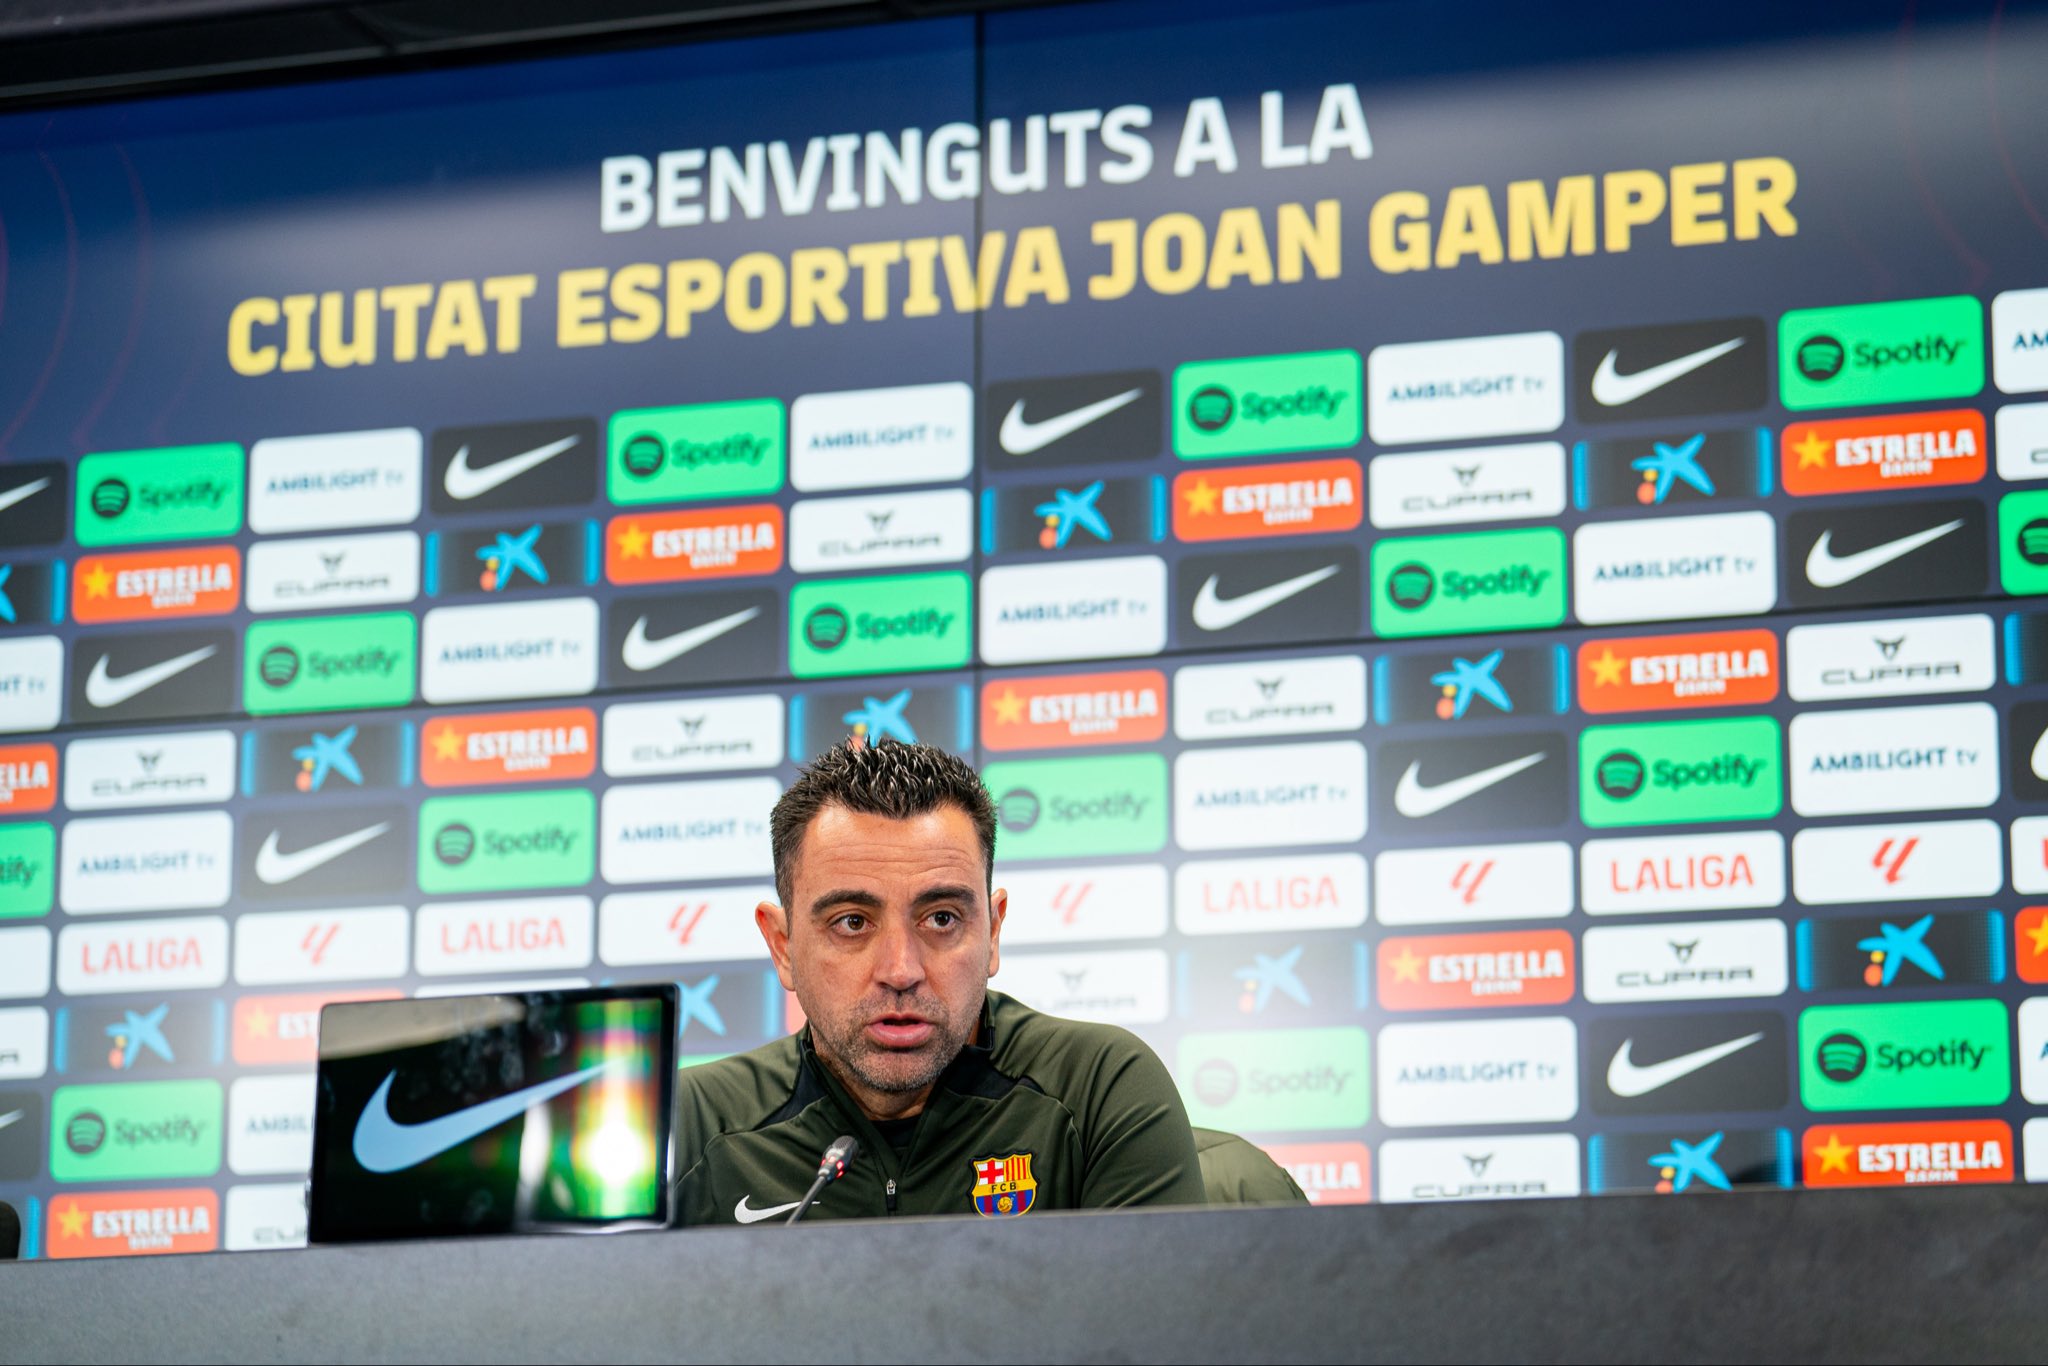 One Barcelona player whose future could change based on Xavi Hernandez decision